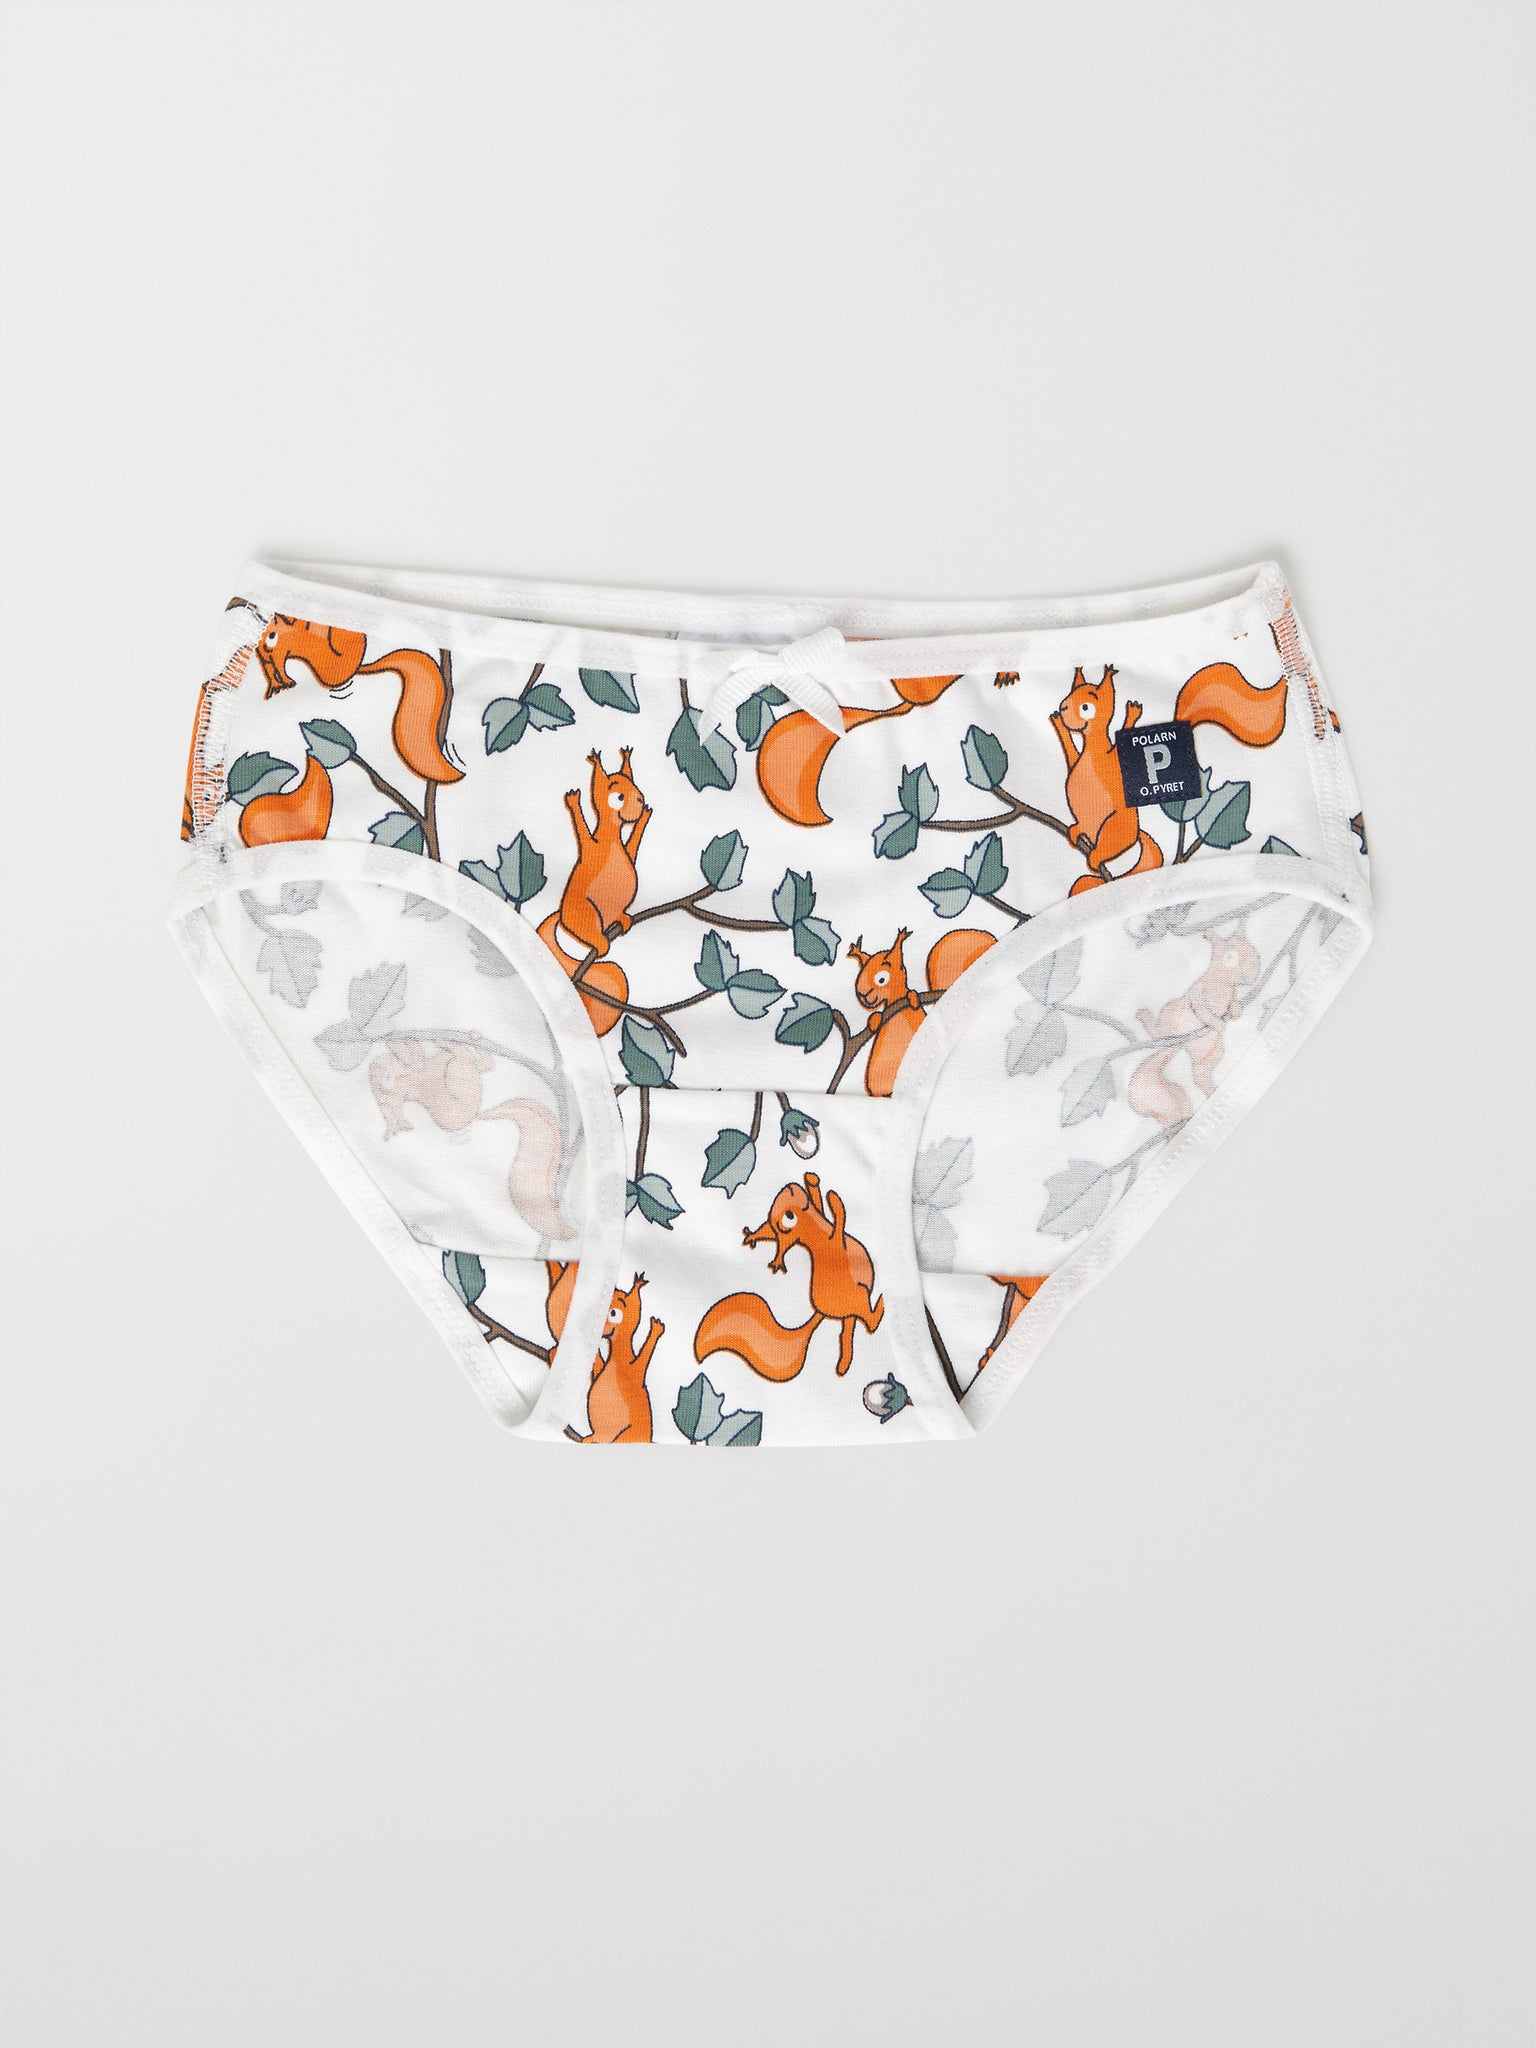 Organic Cotton Girls White Briefs from the Polarn O. Pyret kids collection. Clothes made using sustainably sourced materials.